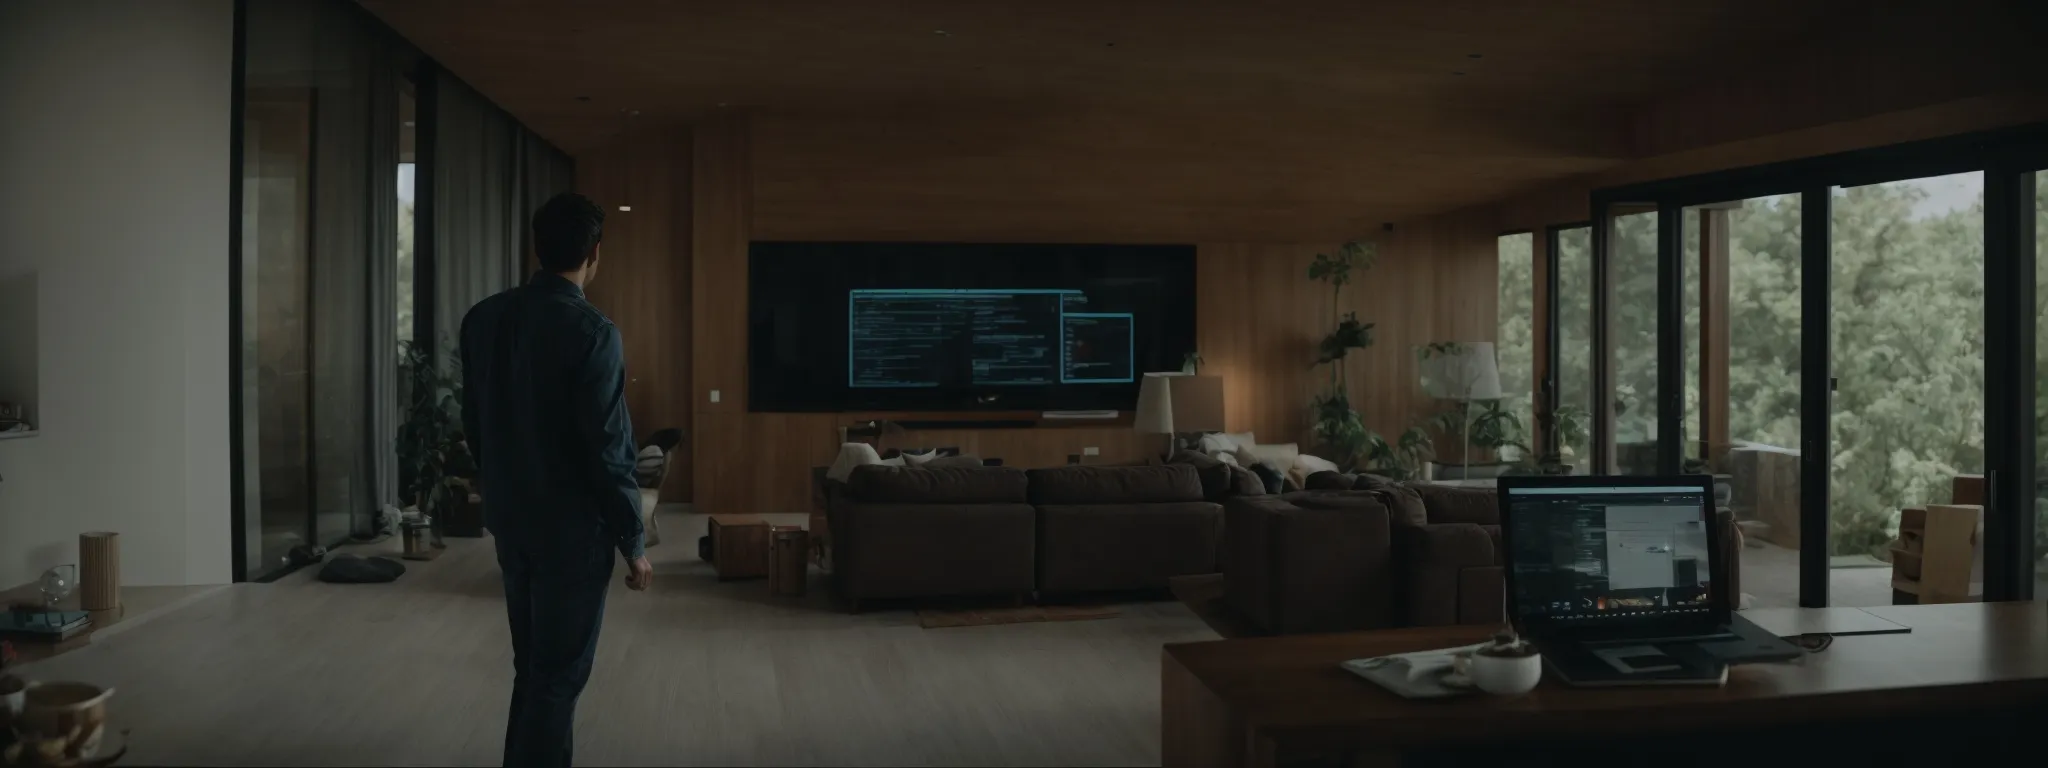 a person standing in a home's open-concept living space with a laptop, analyzing a website's performance metrics on the screen.